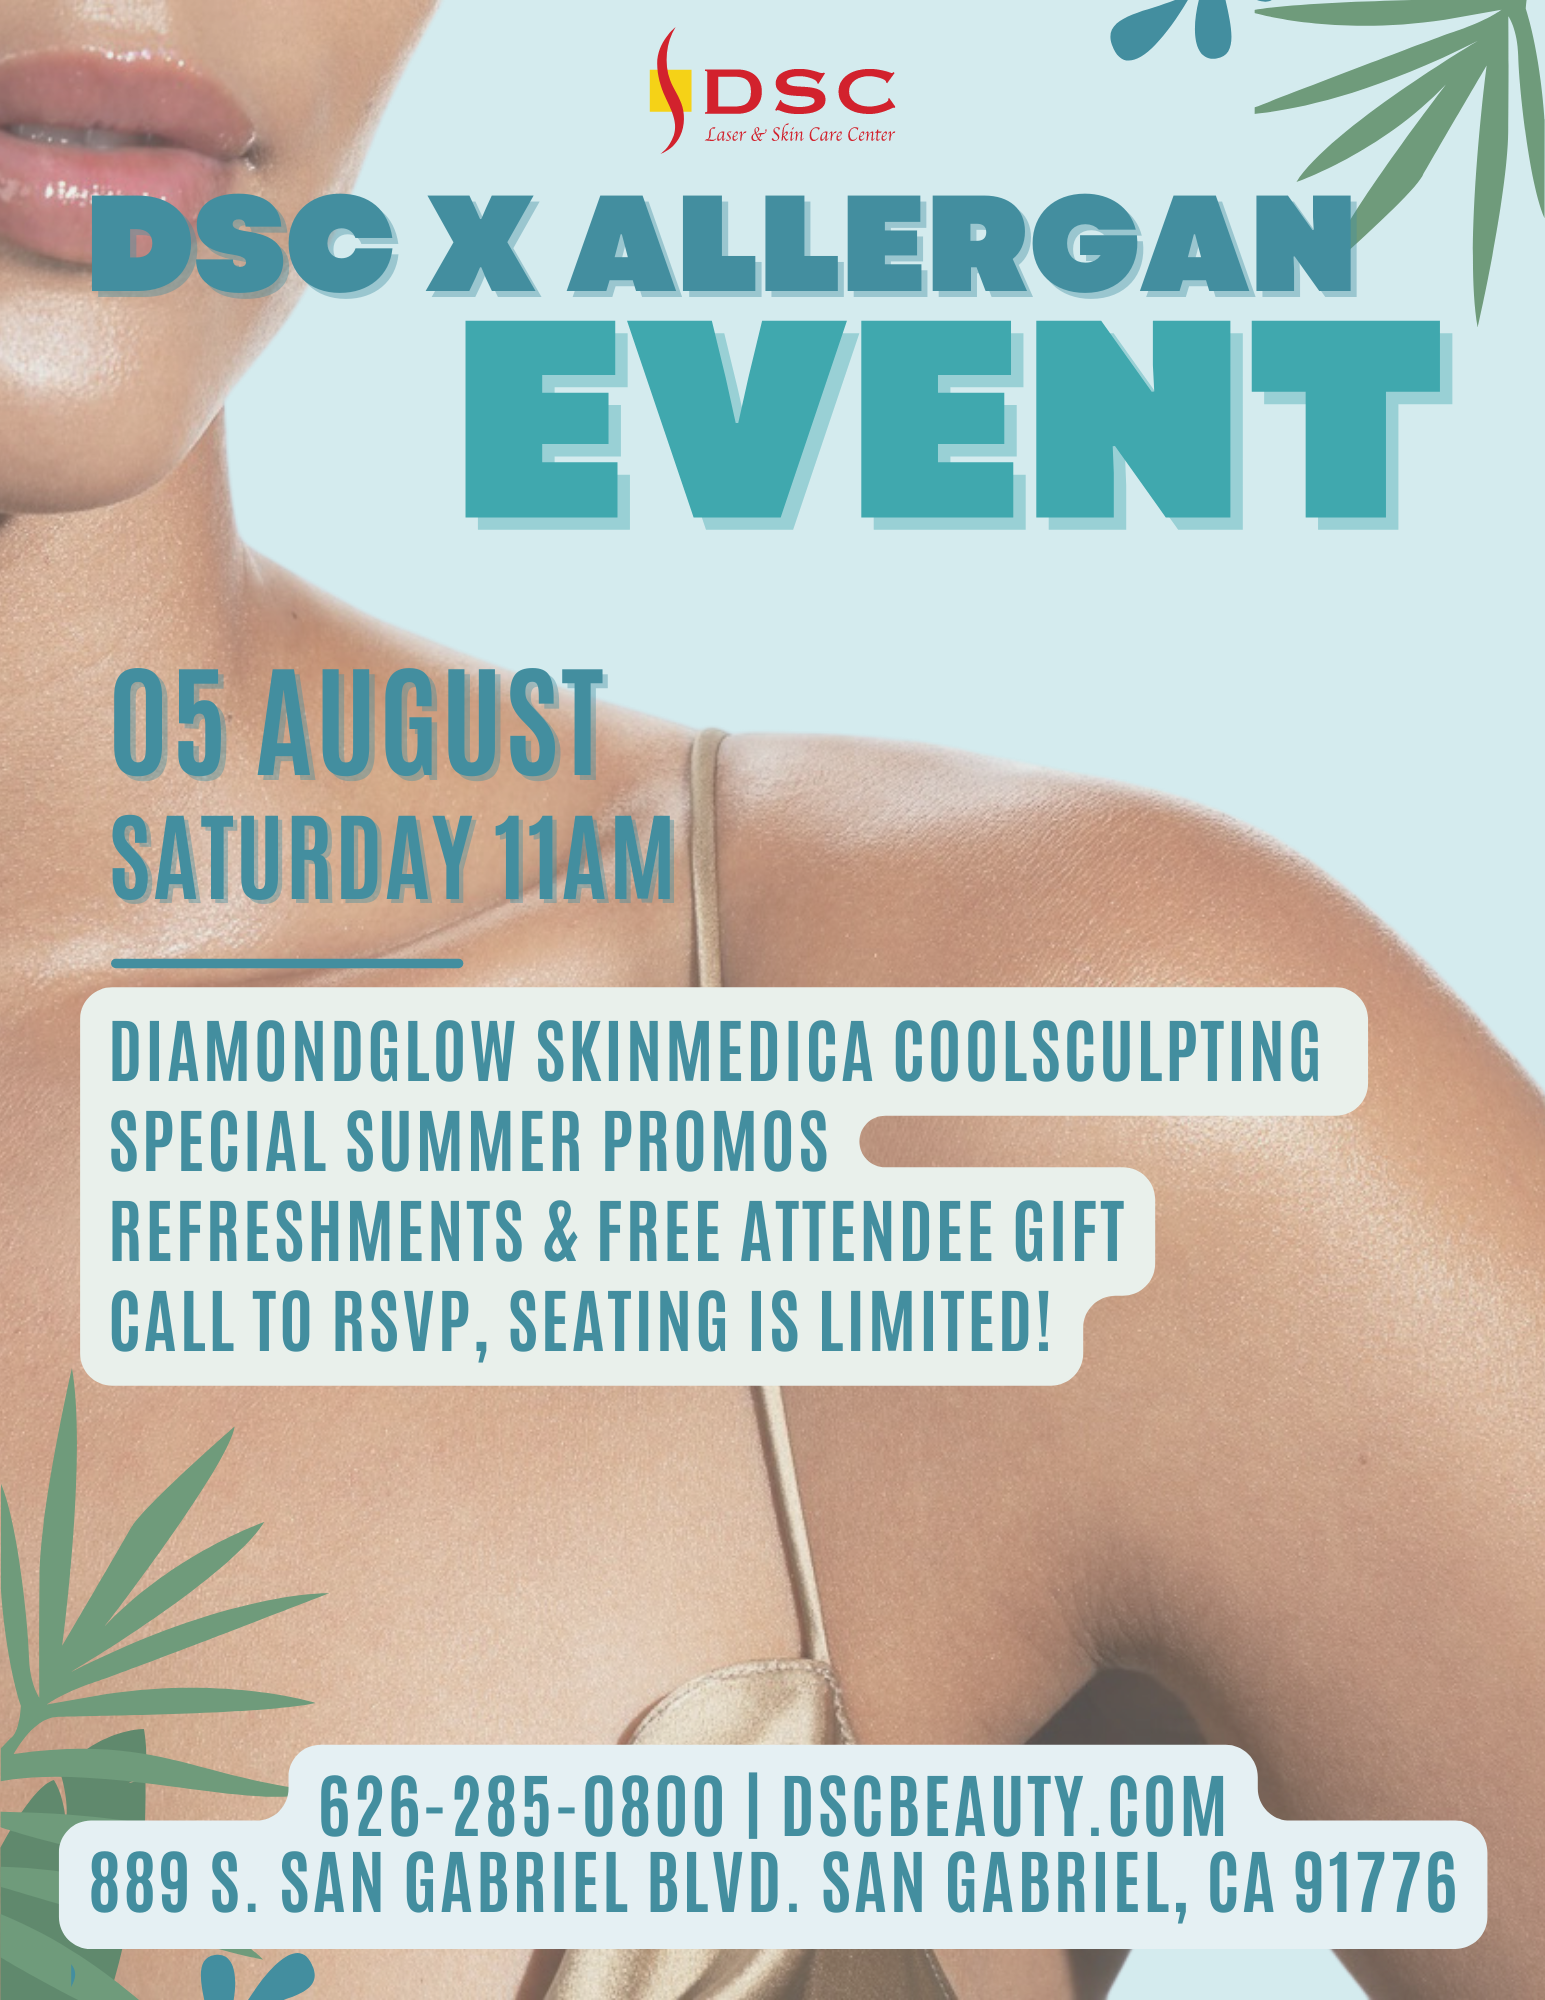 DSC x Allergan Event Flyer featuring woman's lower face and shoulders and chest in the background with a summer motif, the text "August 5th" above "Saturday 11AM" which is above the text " DiamondGlow SkinMedica Coolsculpting, Special Summer Promos, Refreshments & Free Attendee Gift, Call to RSVP Seating is Limited!" with DSC Address, website, and phone at the bottom of the flyer "626-285-0800 | dscbeauty.com and 889 S. San Gabriel Blvd. San Gabriel CA, 91776"